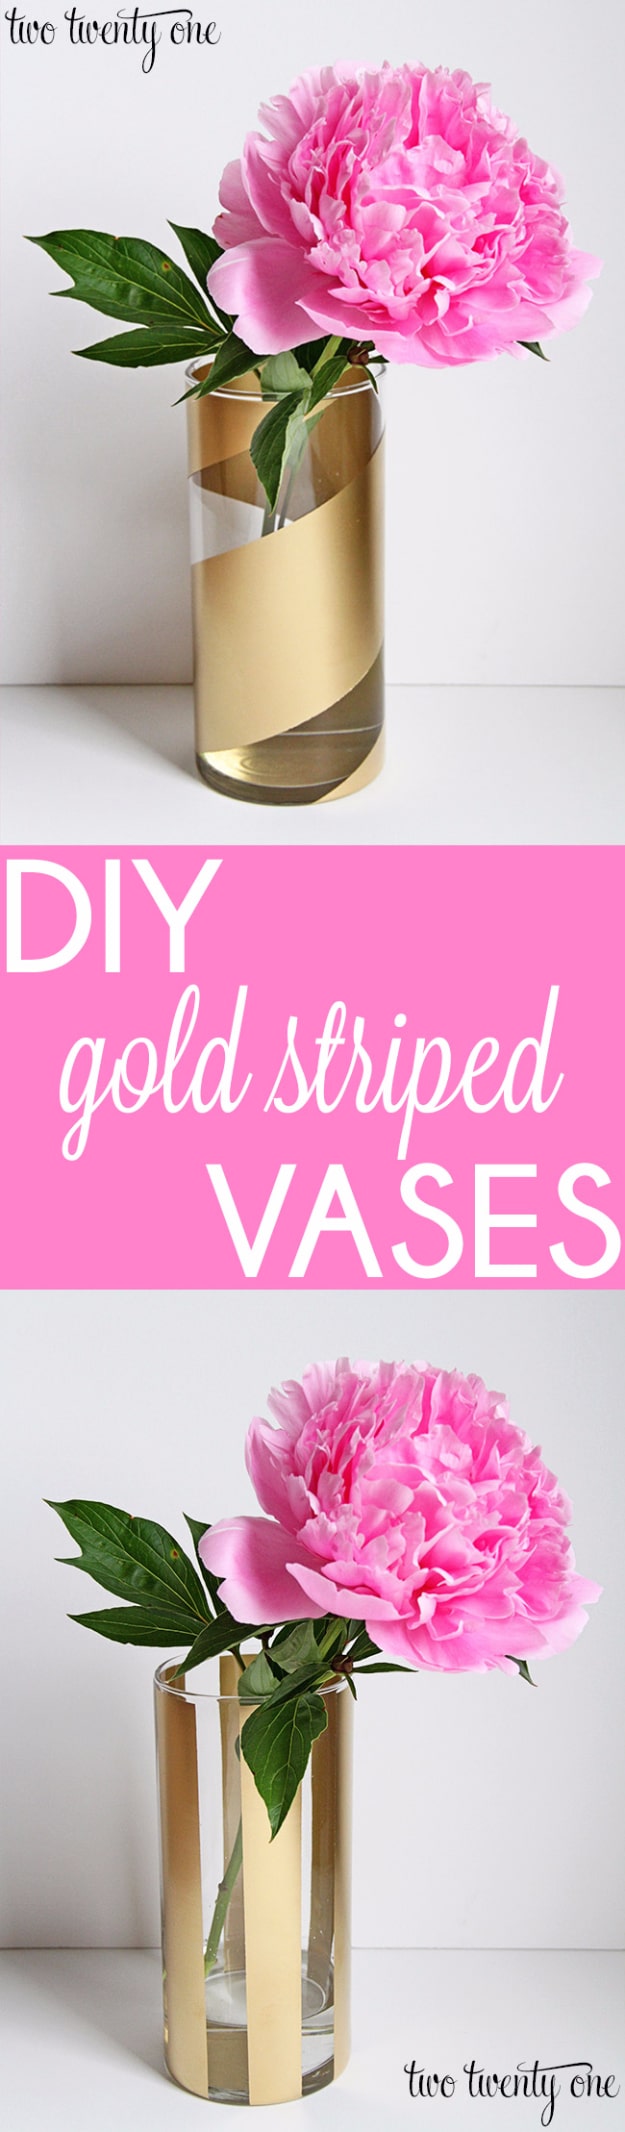  Easy Dollar Store Crafts - DIY Gold Striped Vases - Quick And Cheap Crafts To Make, Dollar Store Craft Ideas To Make And Sell, Cute Dollar Store Do It Yourself Projects, Cheap Craft Ideas, Dollar store Decor, 